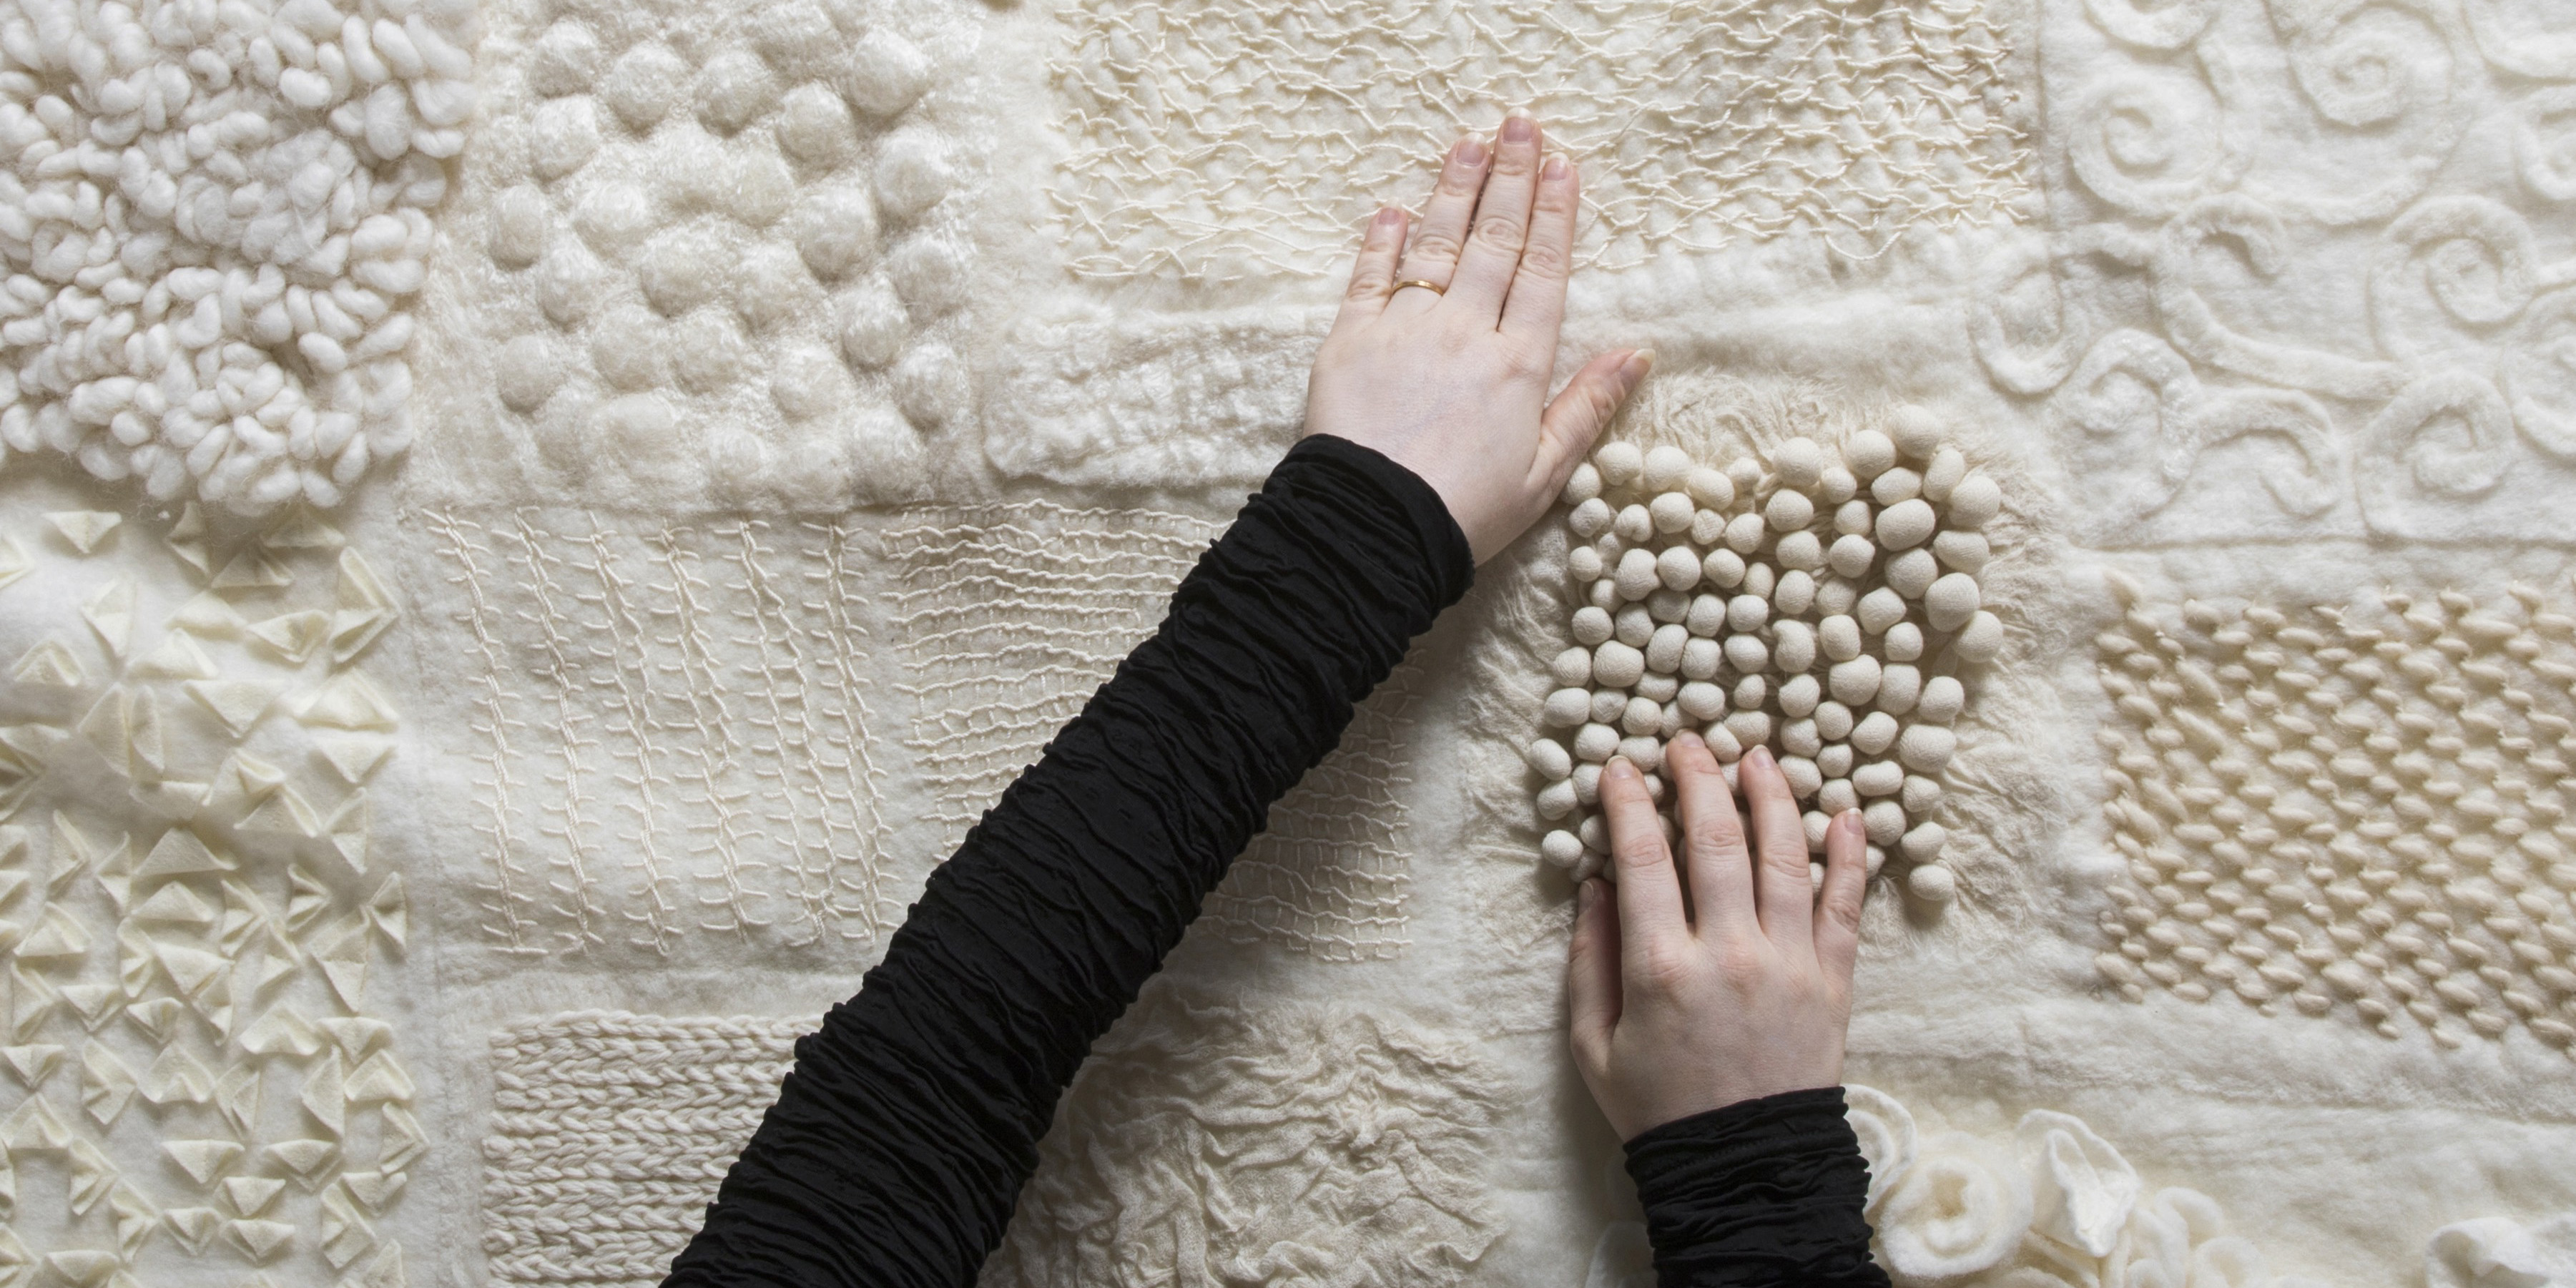 Textile Workshops Drop in on Design, Photograph from above of a patchwork textile made of felt and embroidery techniques, in shades of white. Two hands feel the cloth.